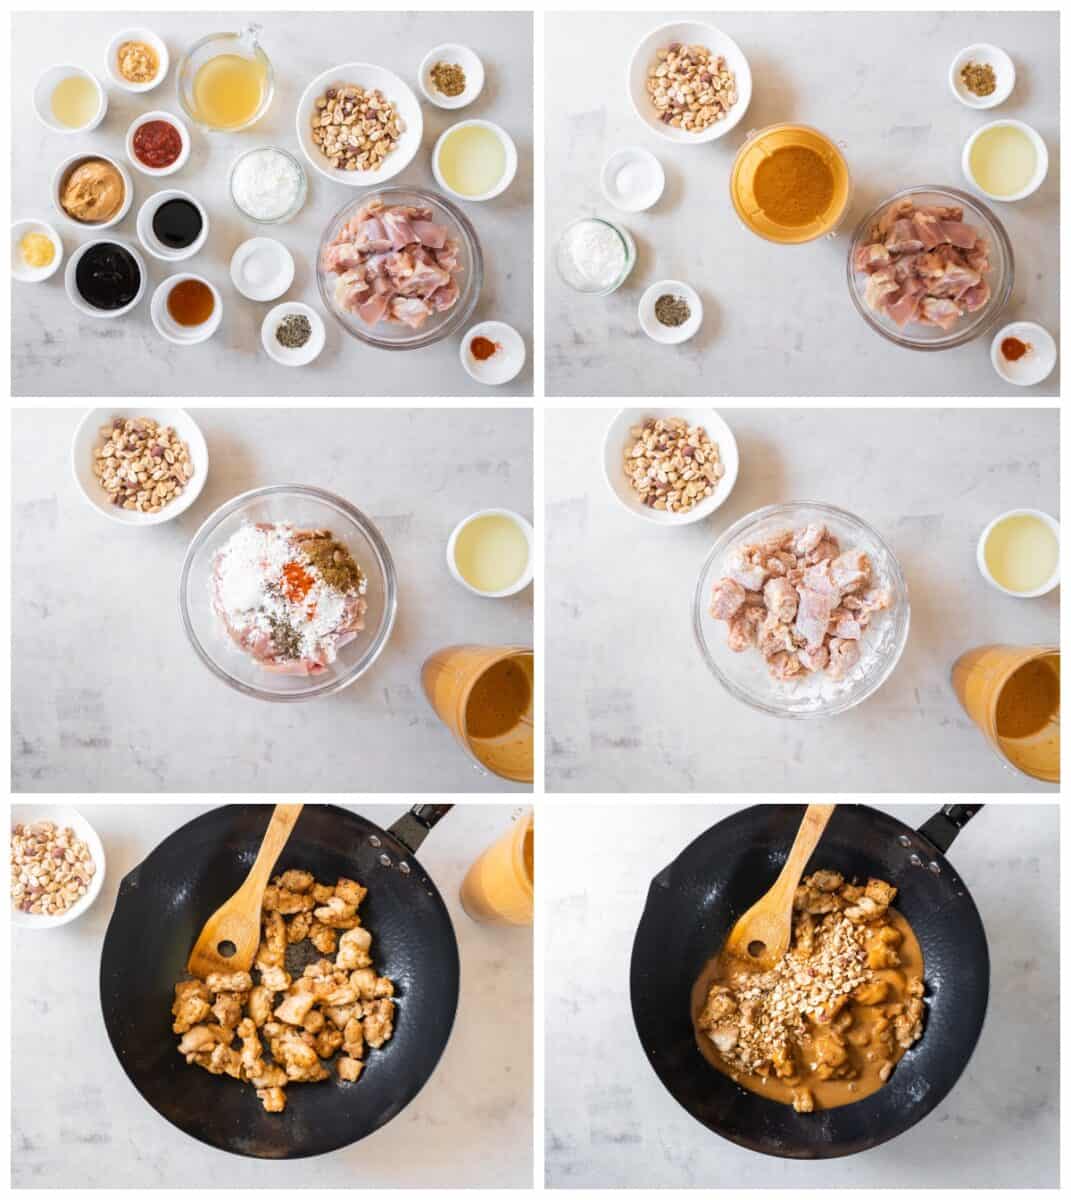 how to make peanut butter chicken step by step photo instructions